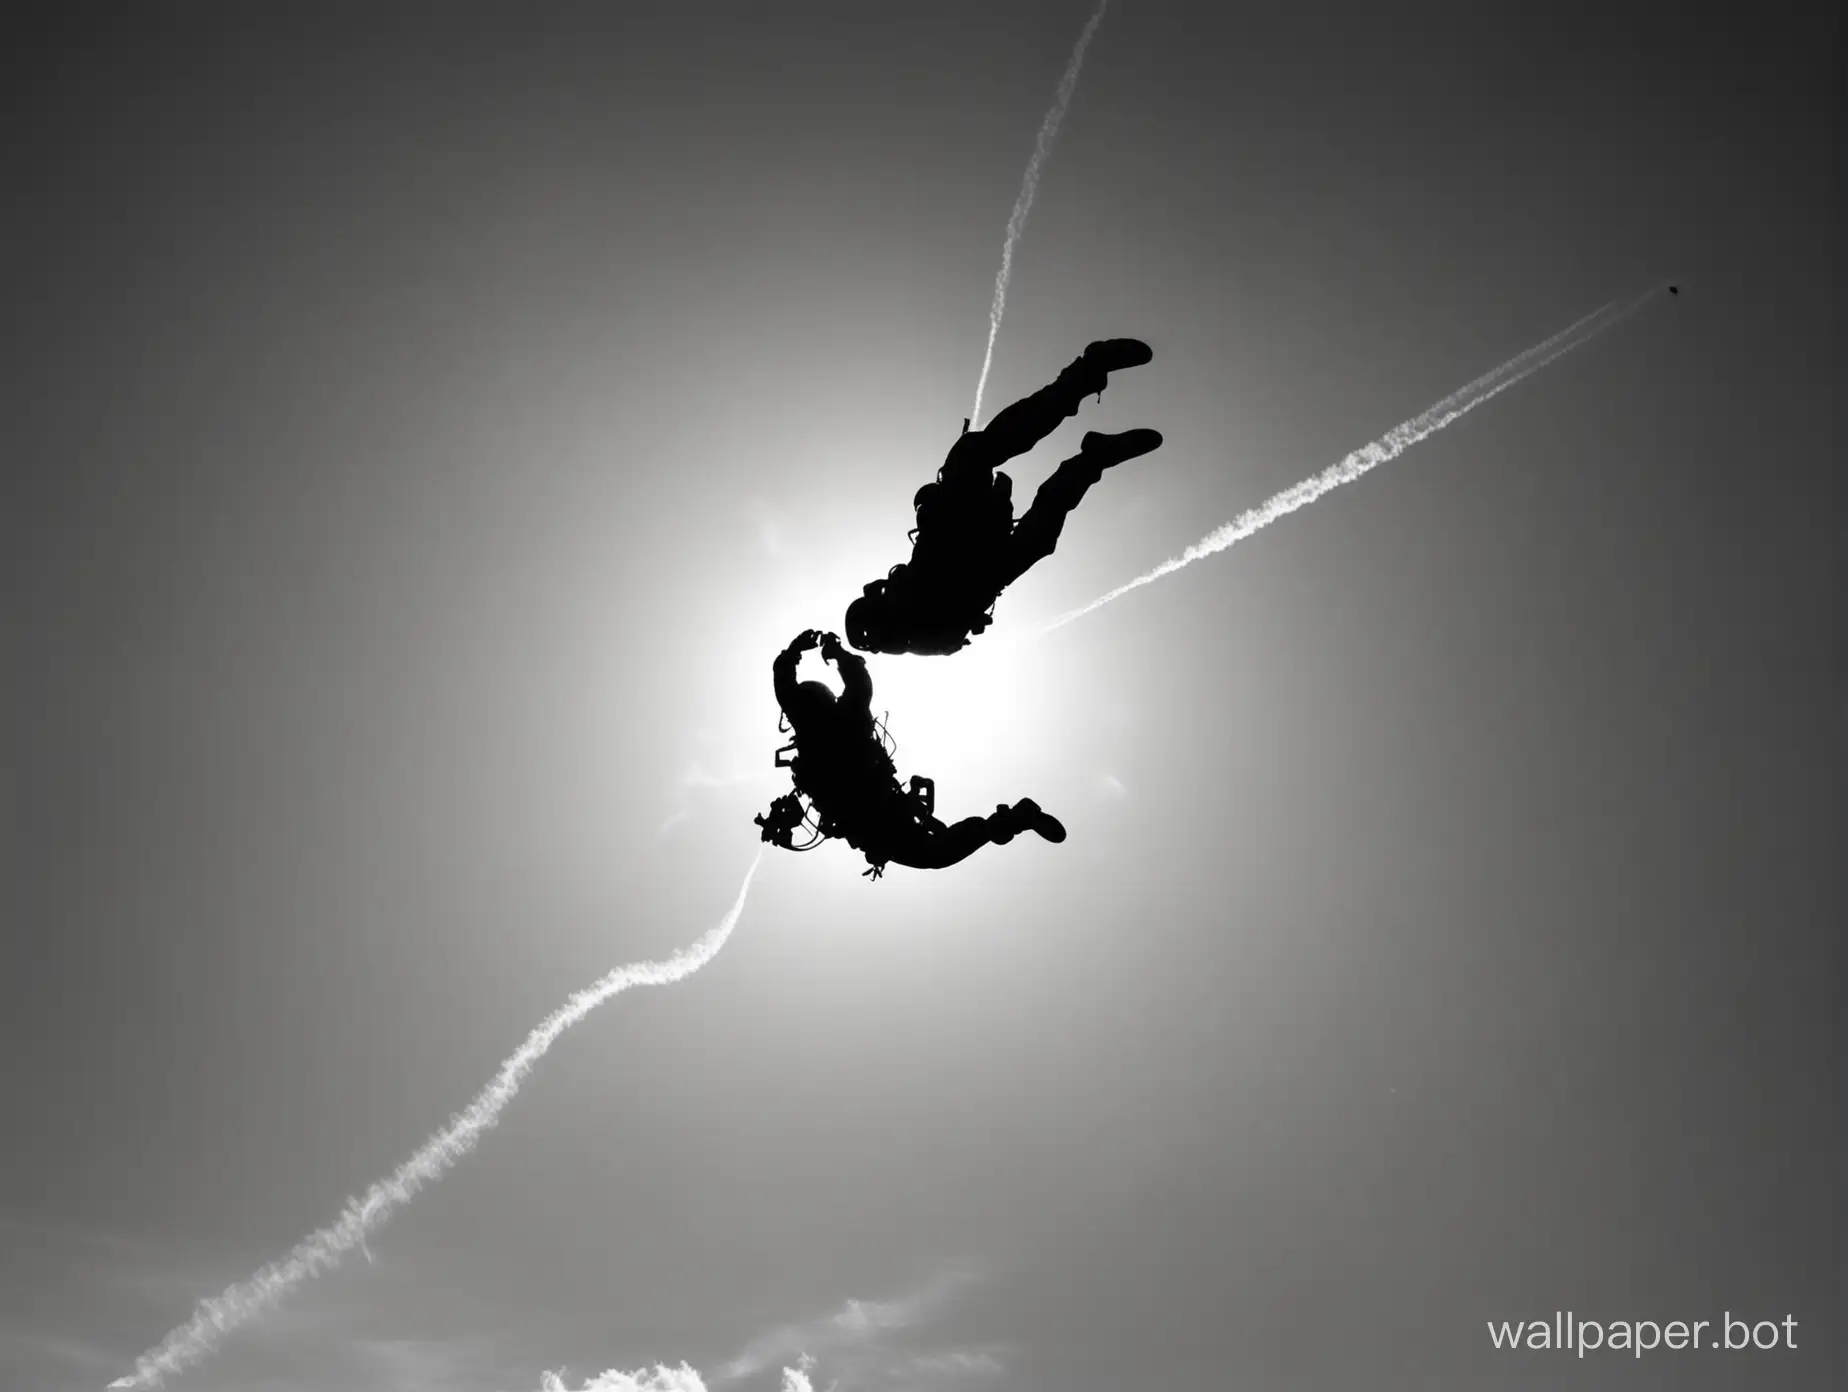 Sky-Diver-Silhouette-Against-Dramatic-Sky-Background